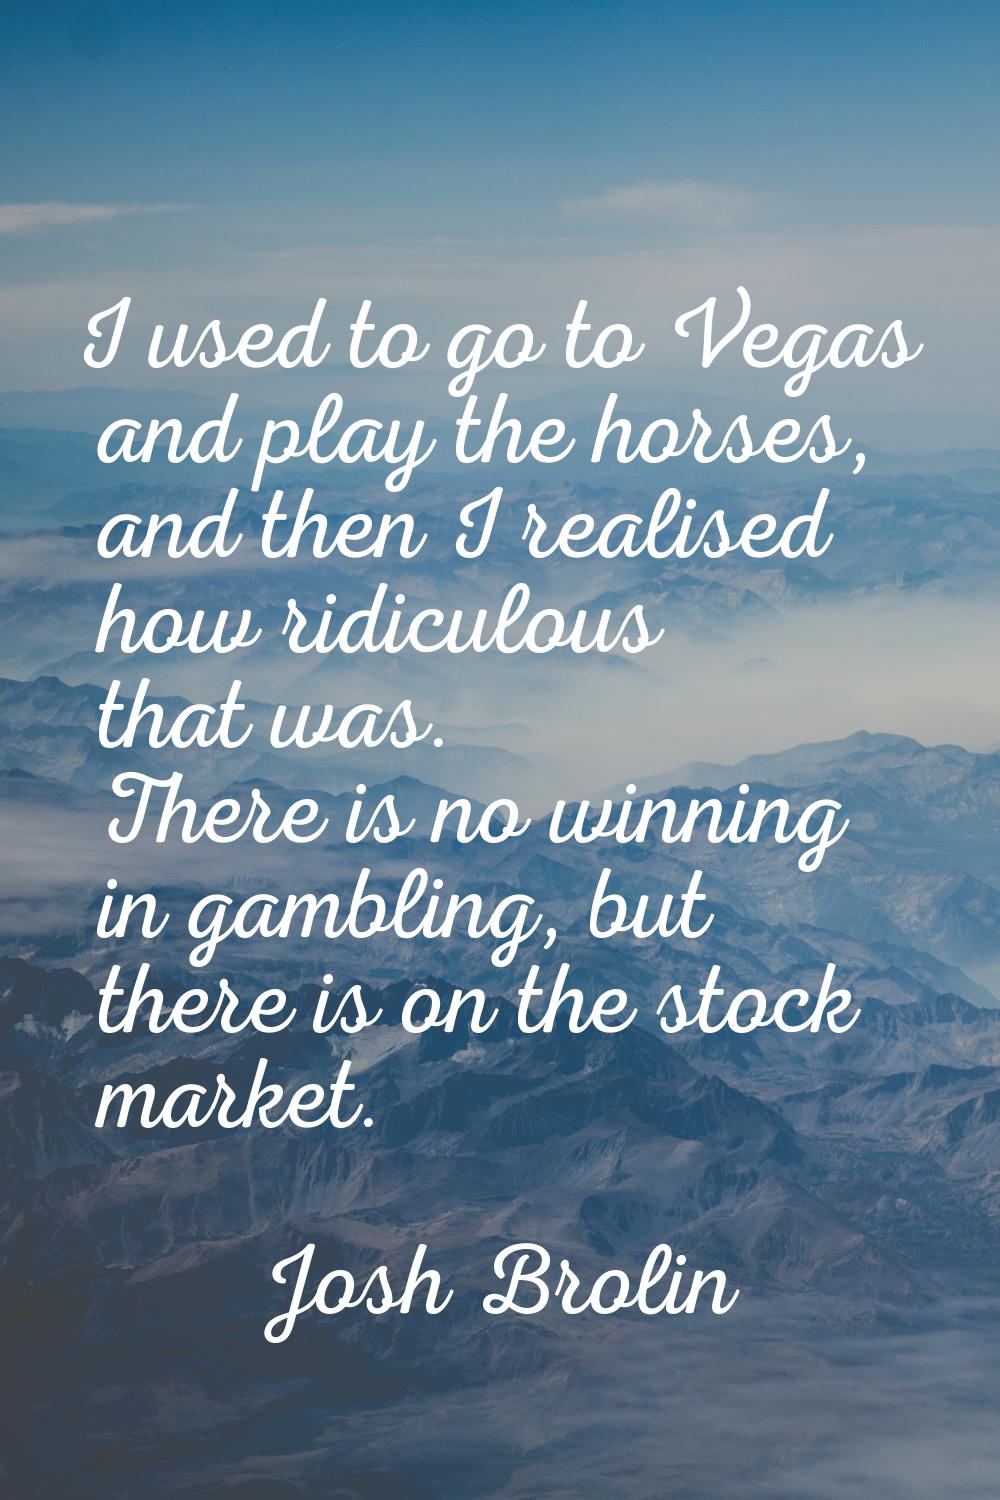 I used to go to Vegas and play the horses, and then I realised how ridiculous that was. There is no